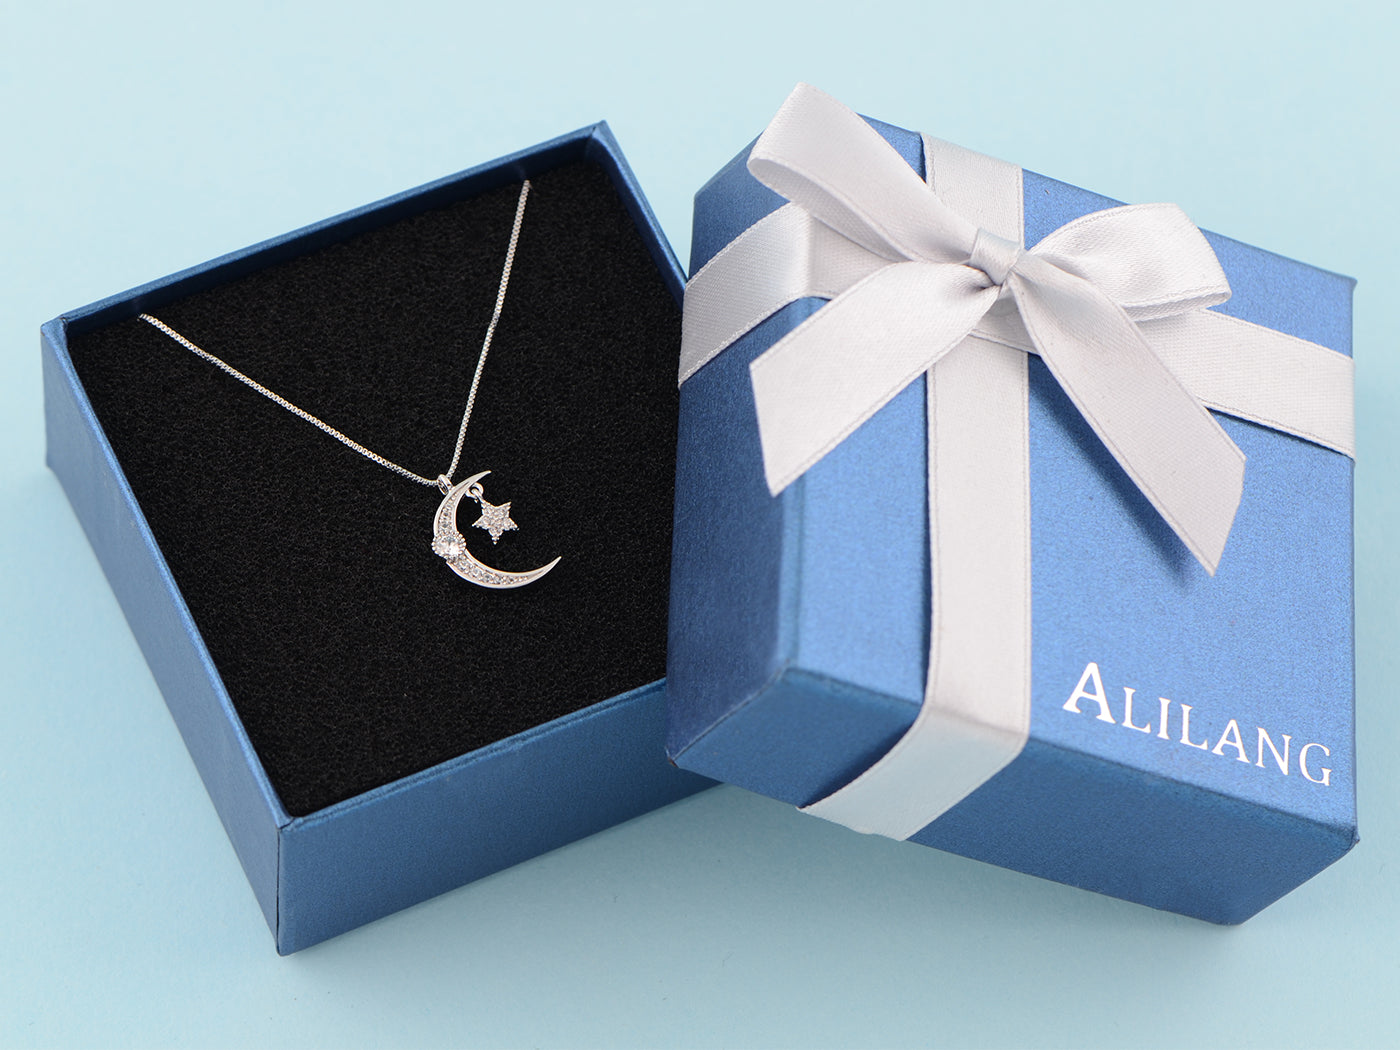 14K Gold Plated Cubic Zirconia Crescent Moon & Star Necklace